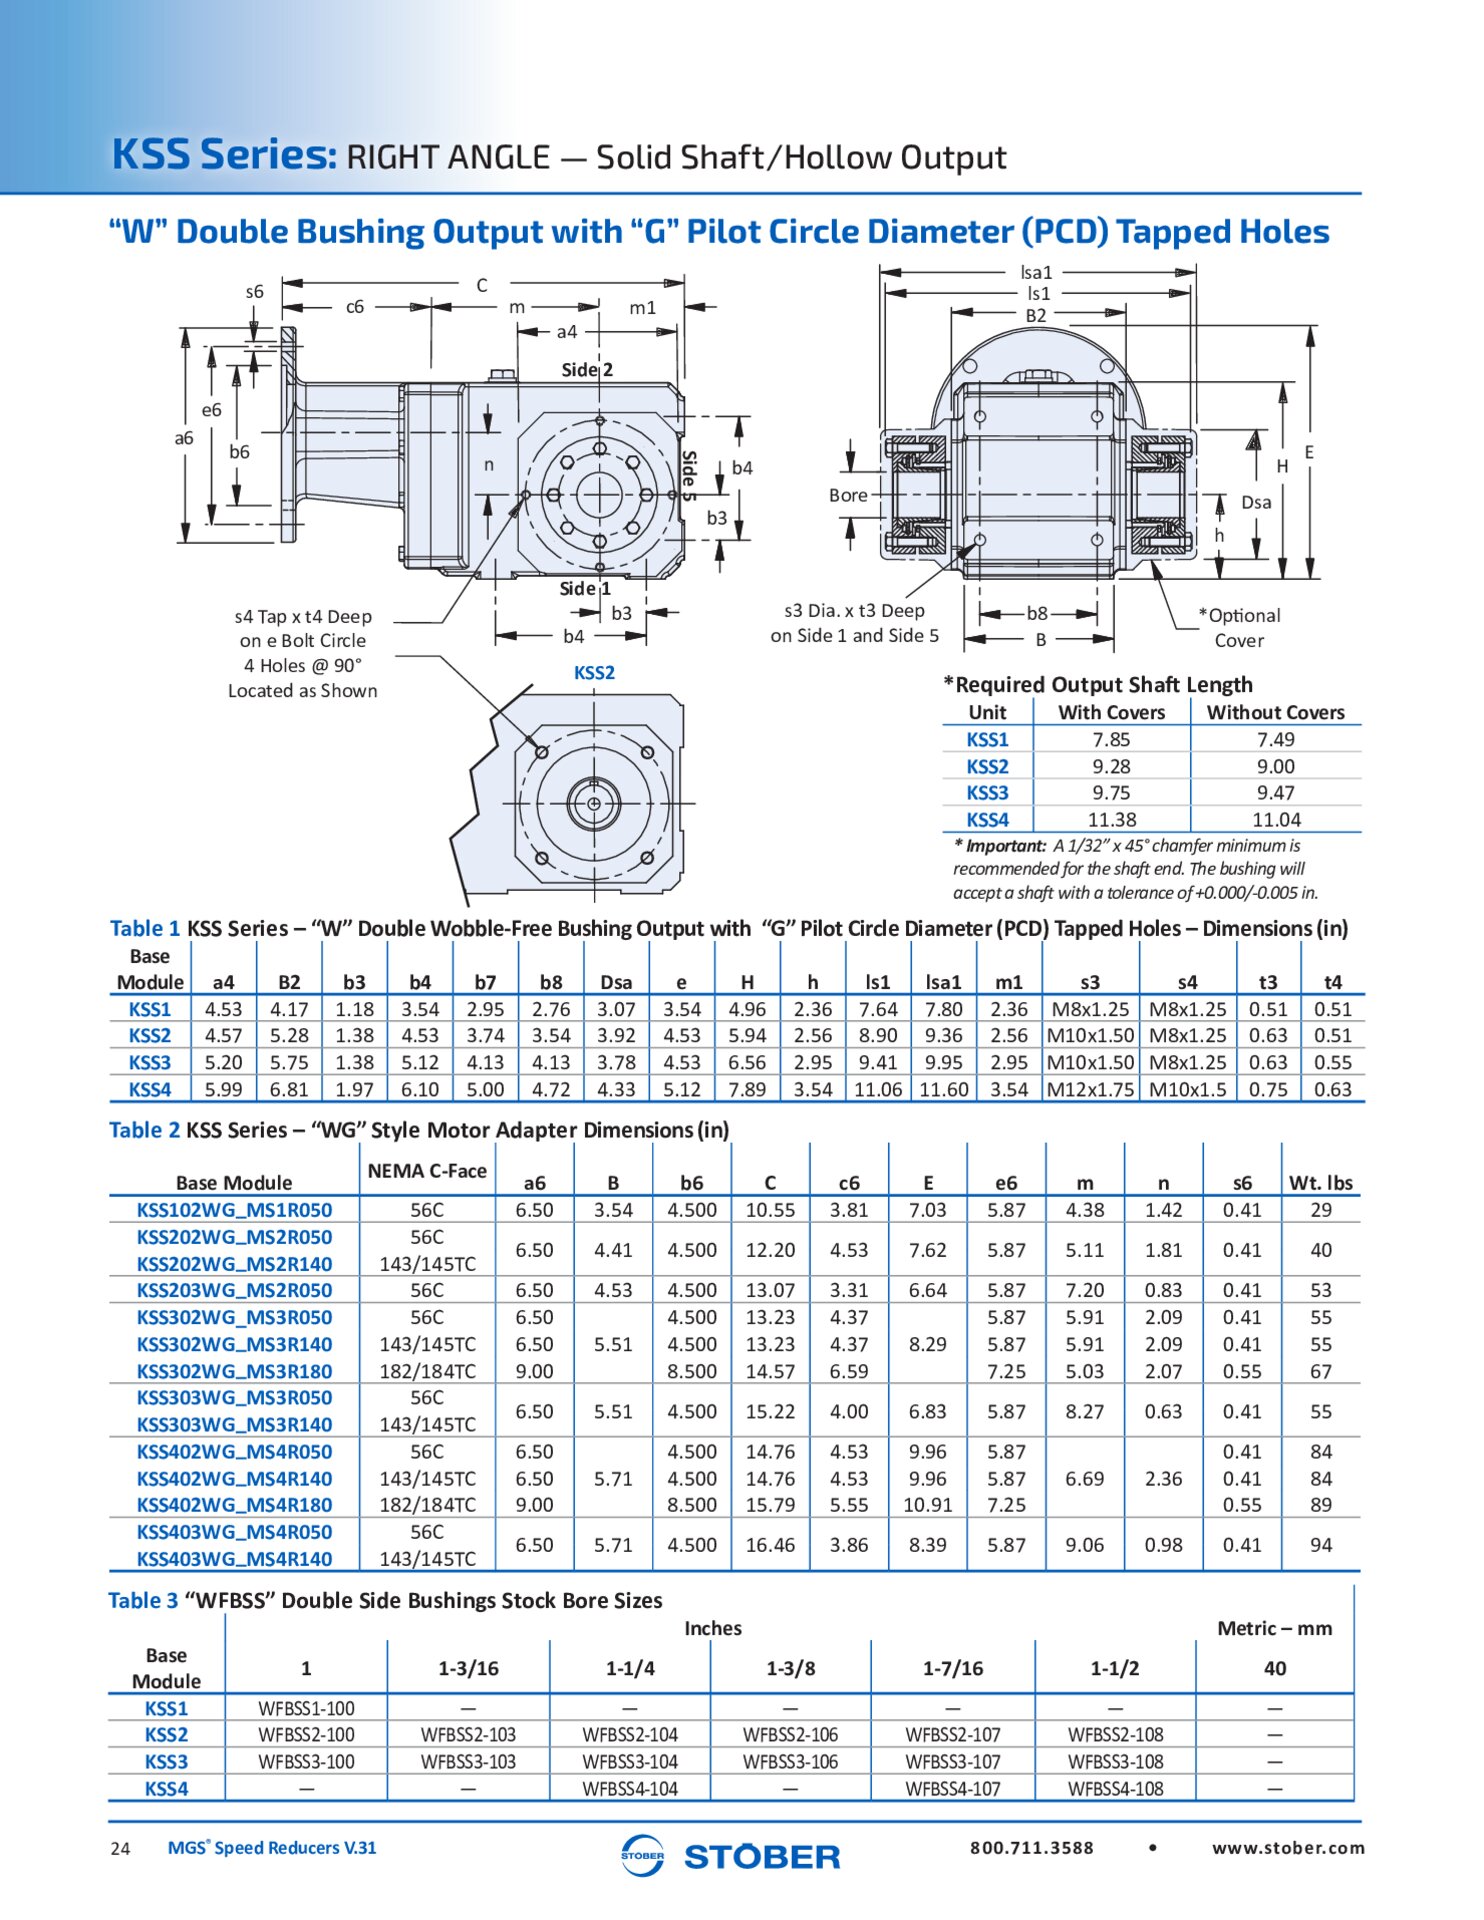 MGS Speed Reducers KSS Dimensions